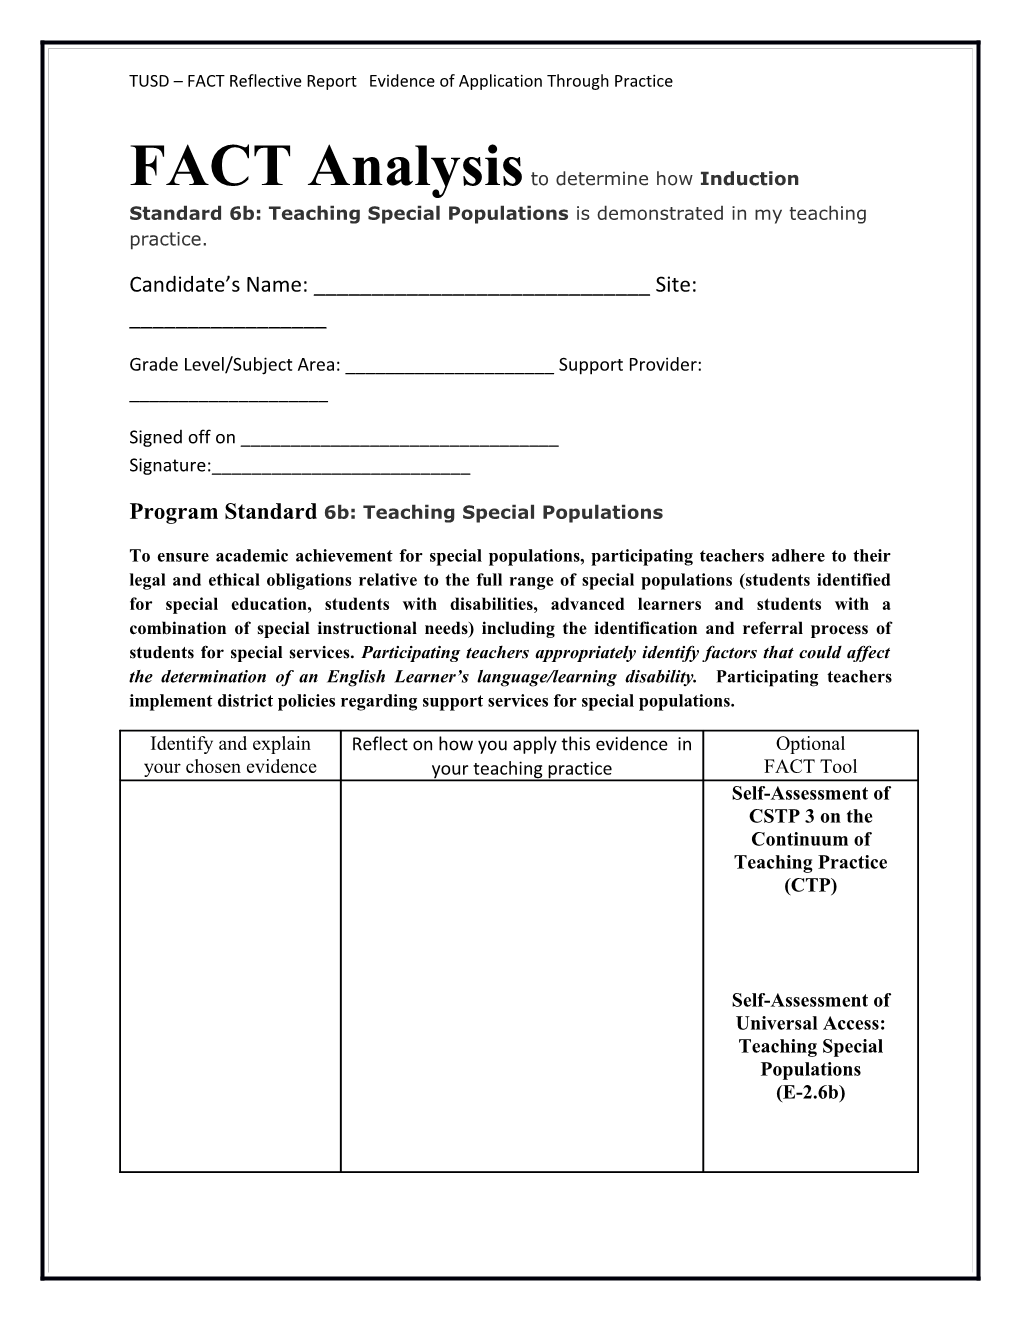 FACT Analysis to Determine How Induction Standard 5: Pedagogy Is Demonstrated in My Teaching